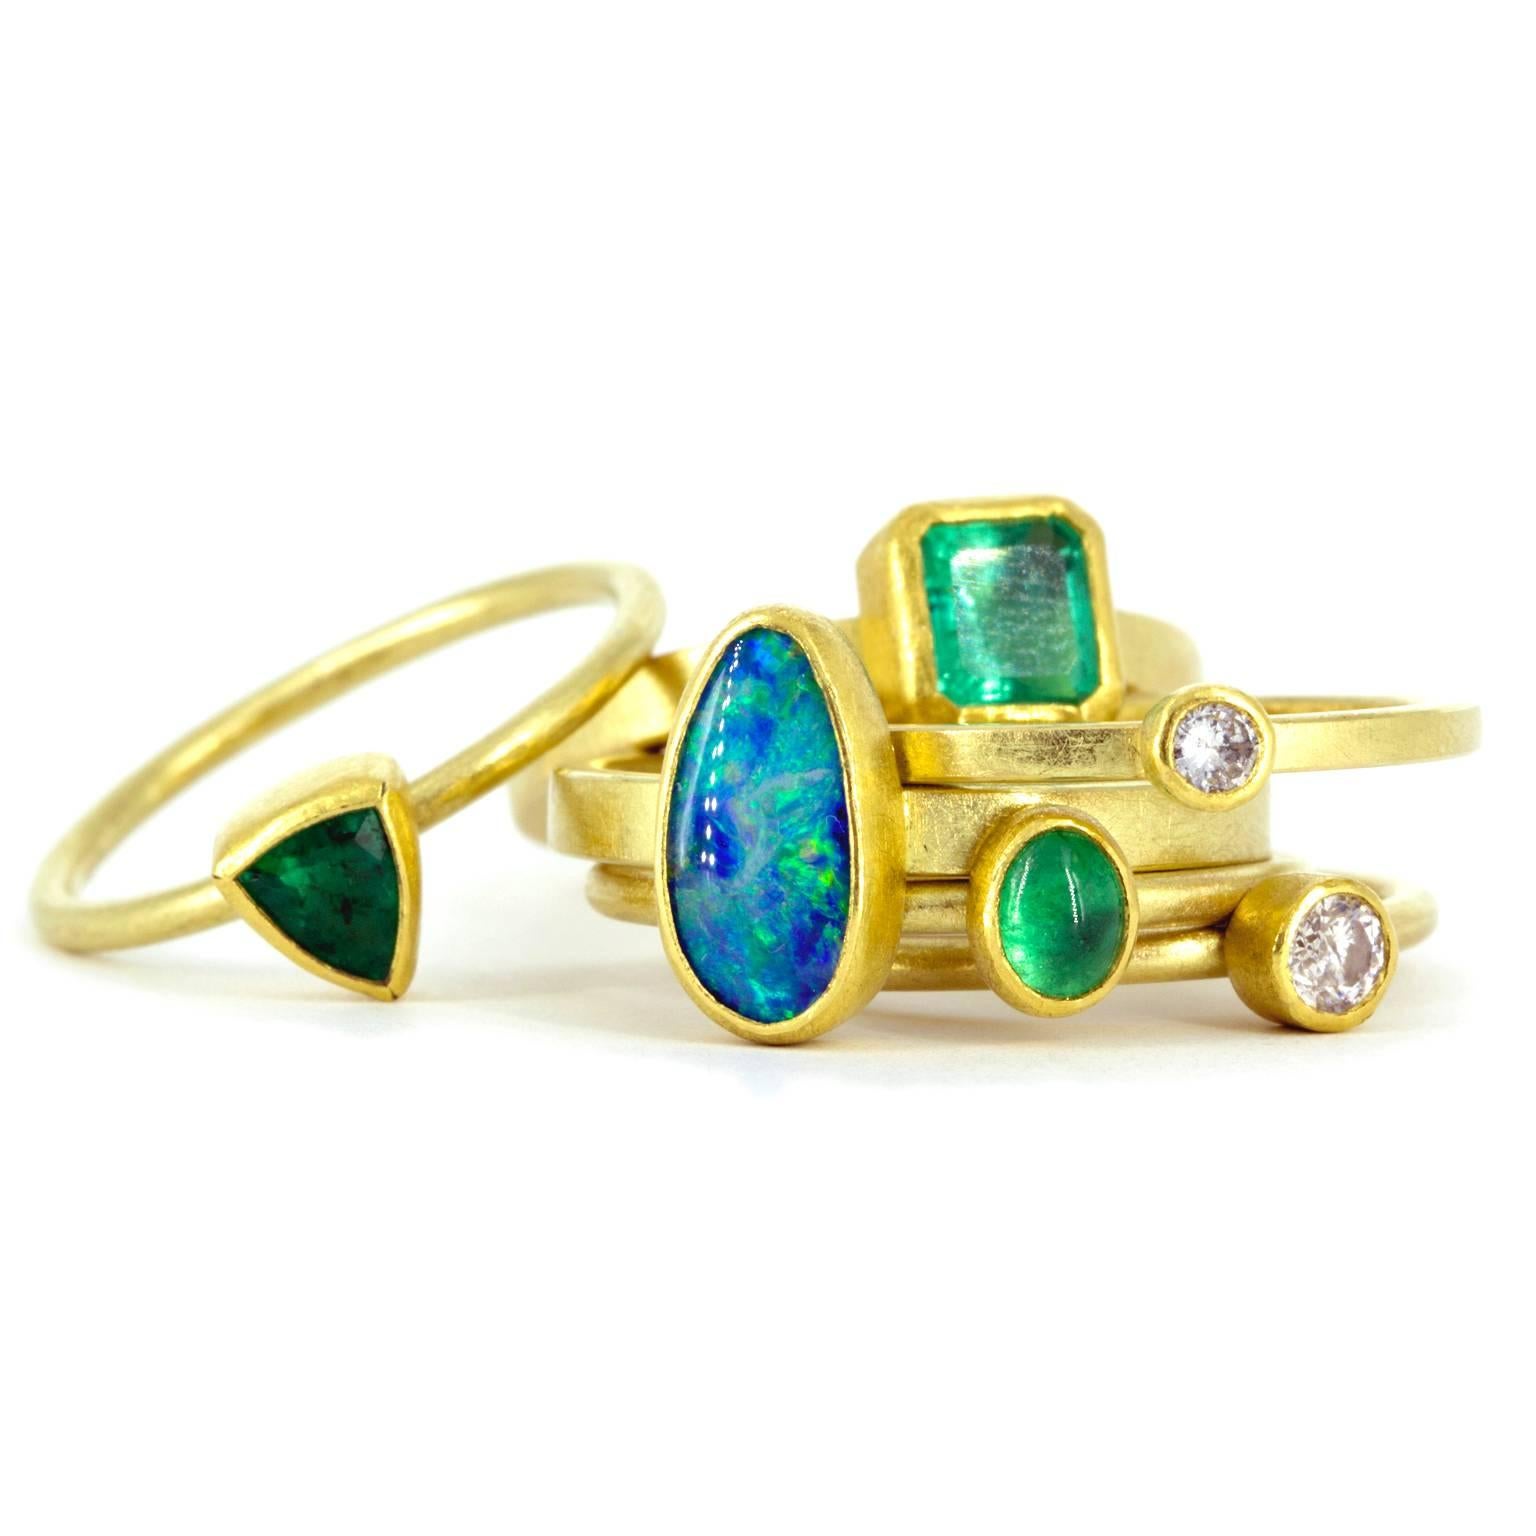 One-of-a-Kind Stacking Ring Set (also available individually; can be sized) handcrafted by jewelry artist Petra Class with assorted width 22k yellow gold and 18k yellow gold bands. Showcasing bezel-set gemstones from top to bottom:

0.50 carat